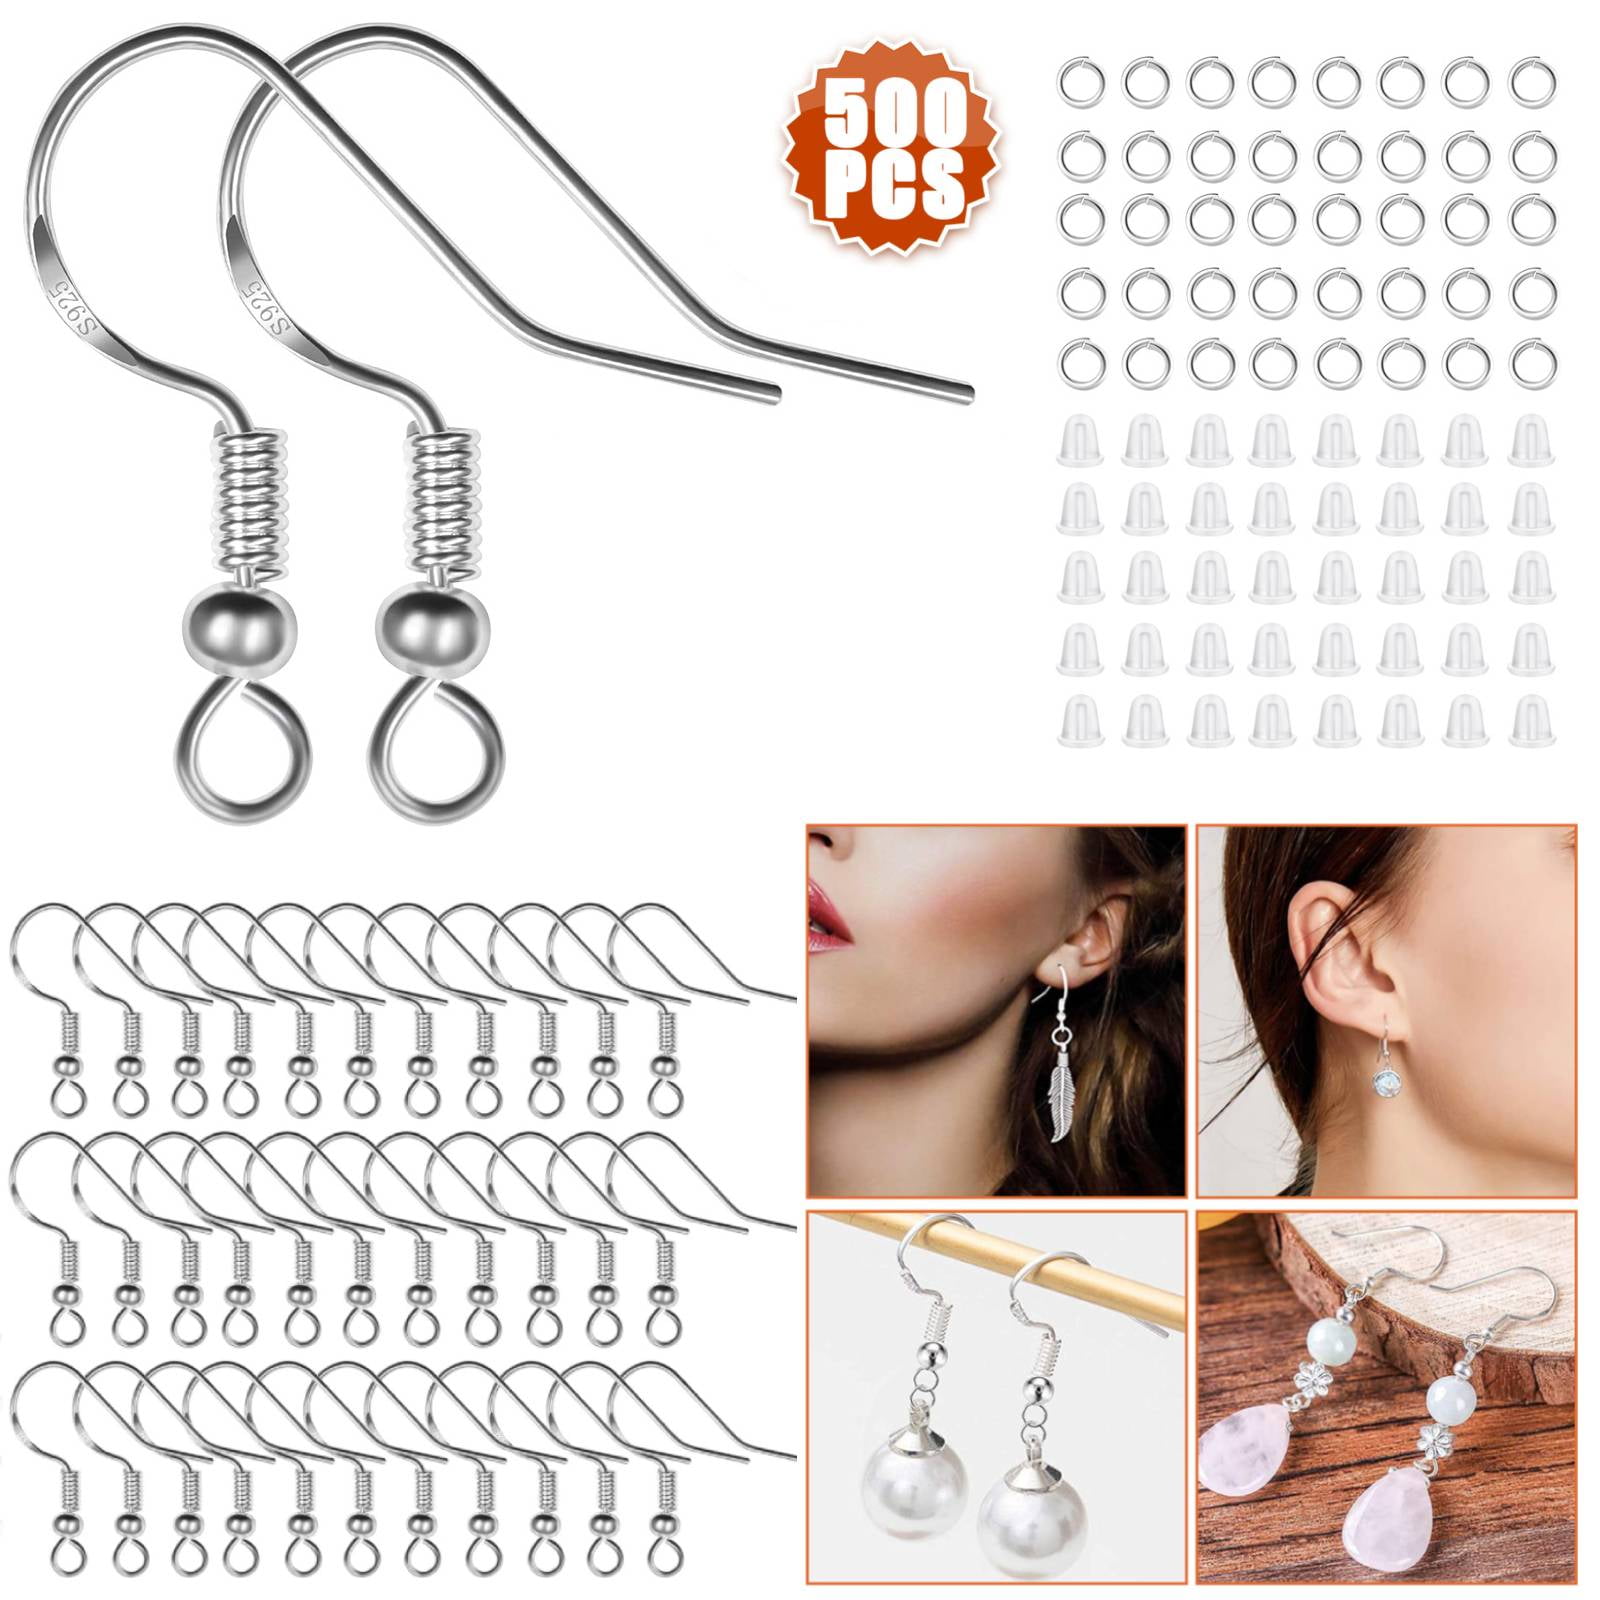 CELECTIGO 925 Sterling Silver Earring Hooks, 1000-Pcs Ear Wire Fish Hooks  Hypoallergenic Earring Making Kit with Clear Silicone Earring Backs  Stoppers